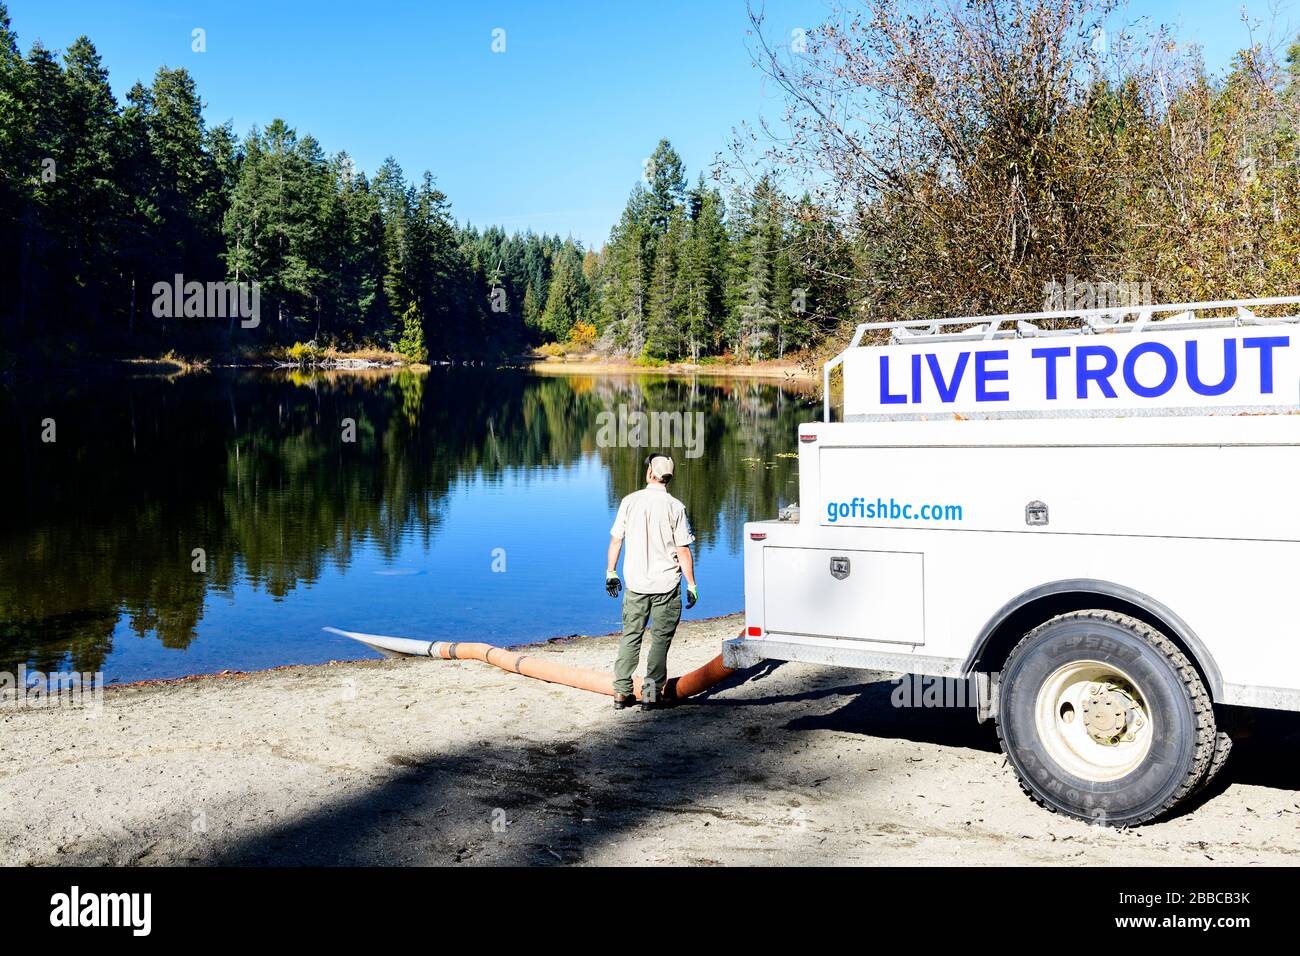 A fisheries man releases live trout into Spectacle Lake on the Malahat near Victoria, British Columbia. Stock Photo